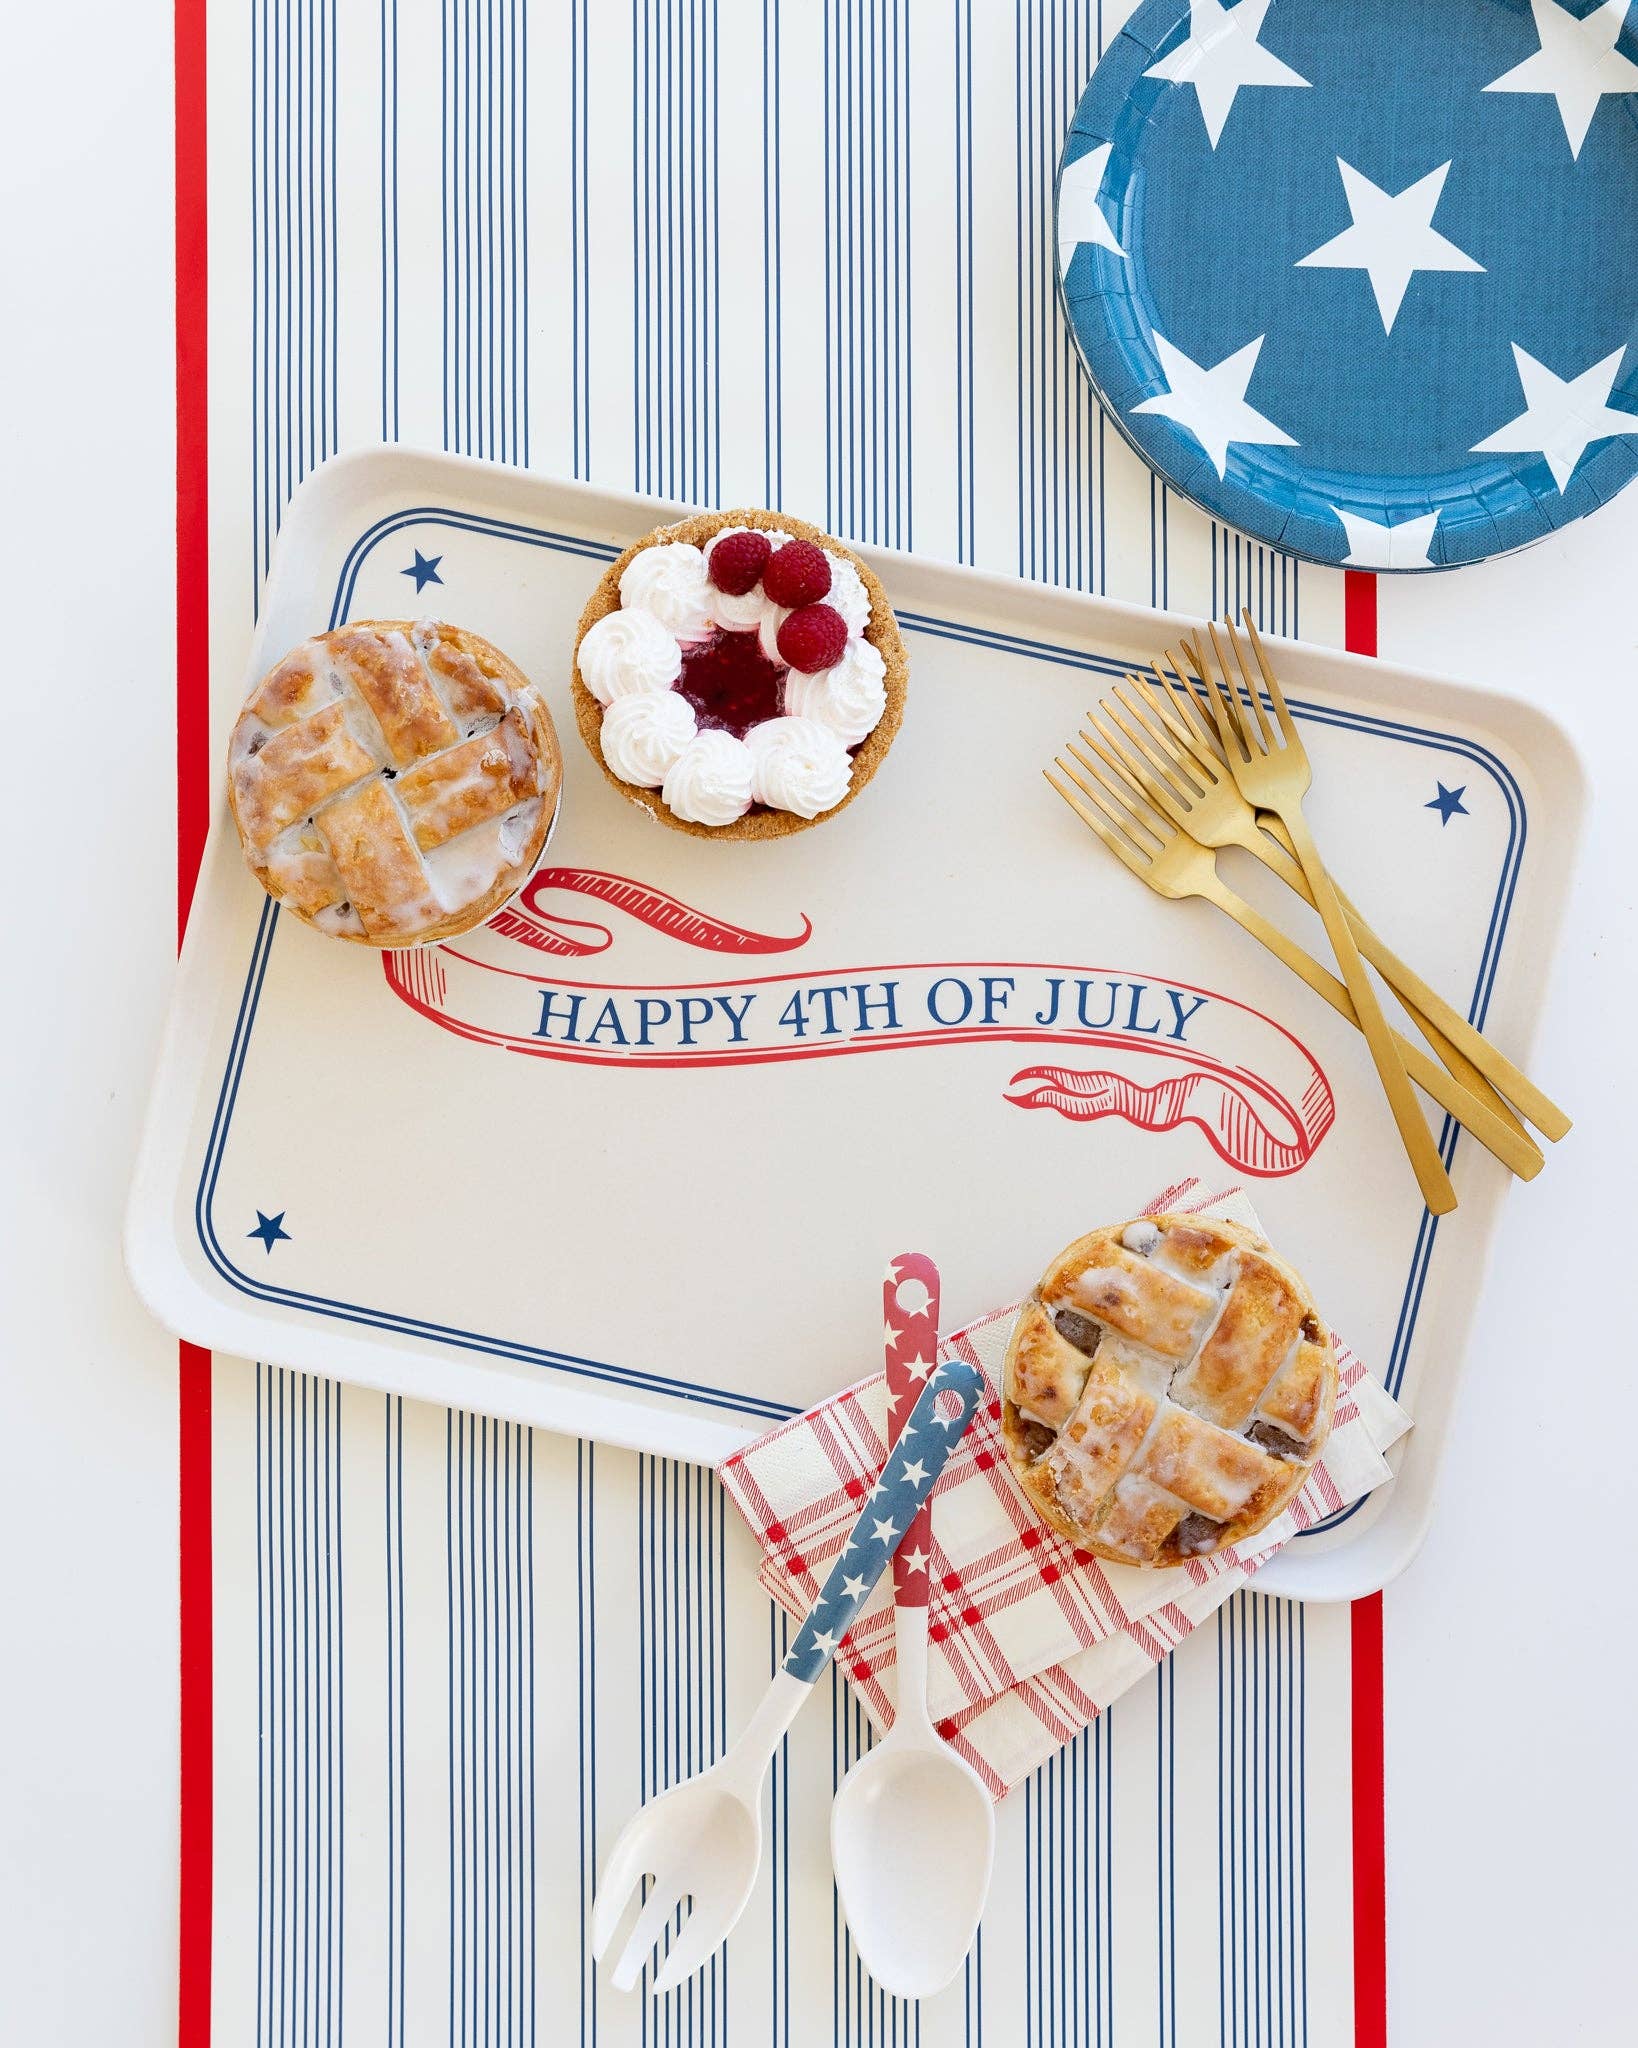 My Mind’s Eye - SSP922 - Happy 4th of July Reusable Bamboo Serving Tray - Fenwick & OliverMy Mind’s Eye - SSP922 - Happy 4th of July Reusable Bamboo Serving TrayMy Mind’s EyeFenwick & OliverSSP922